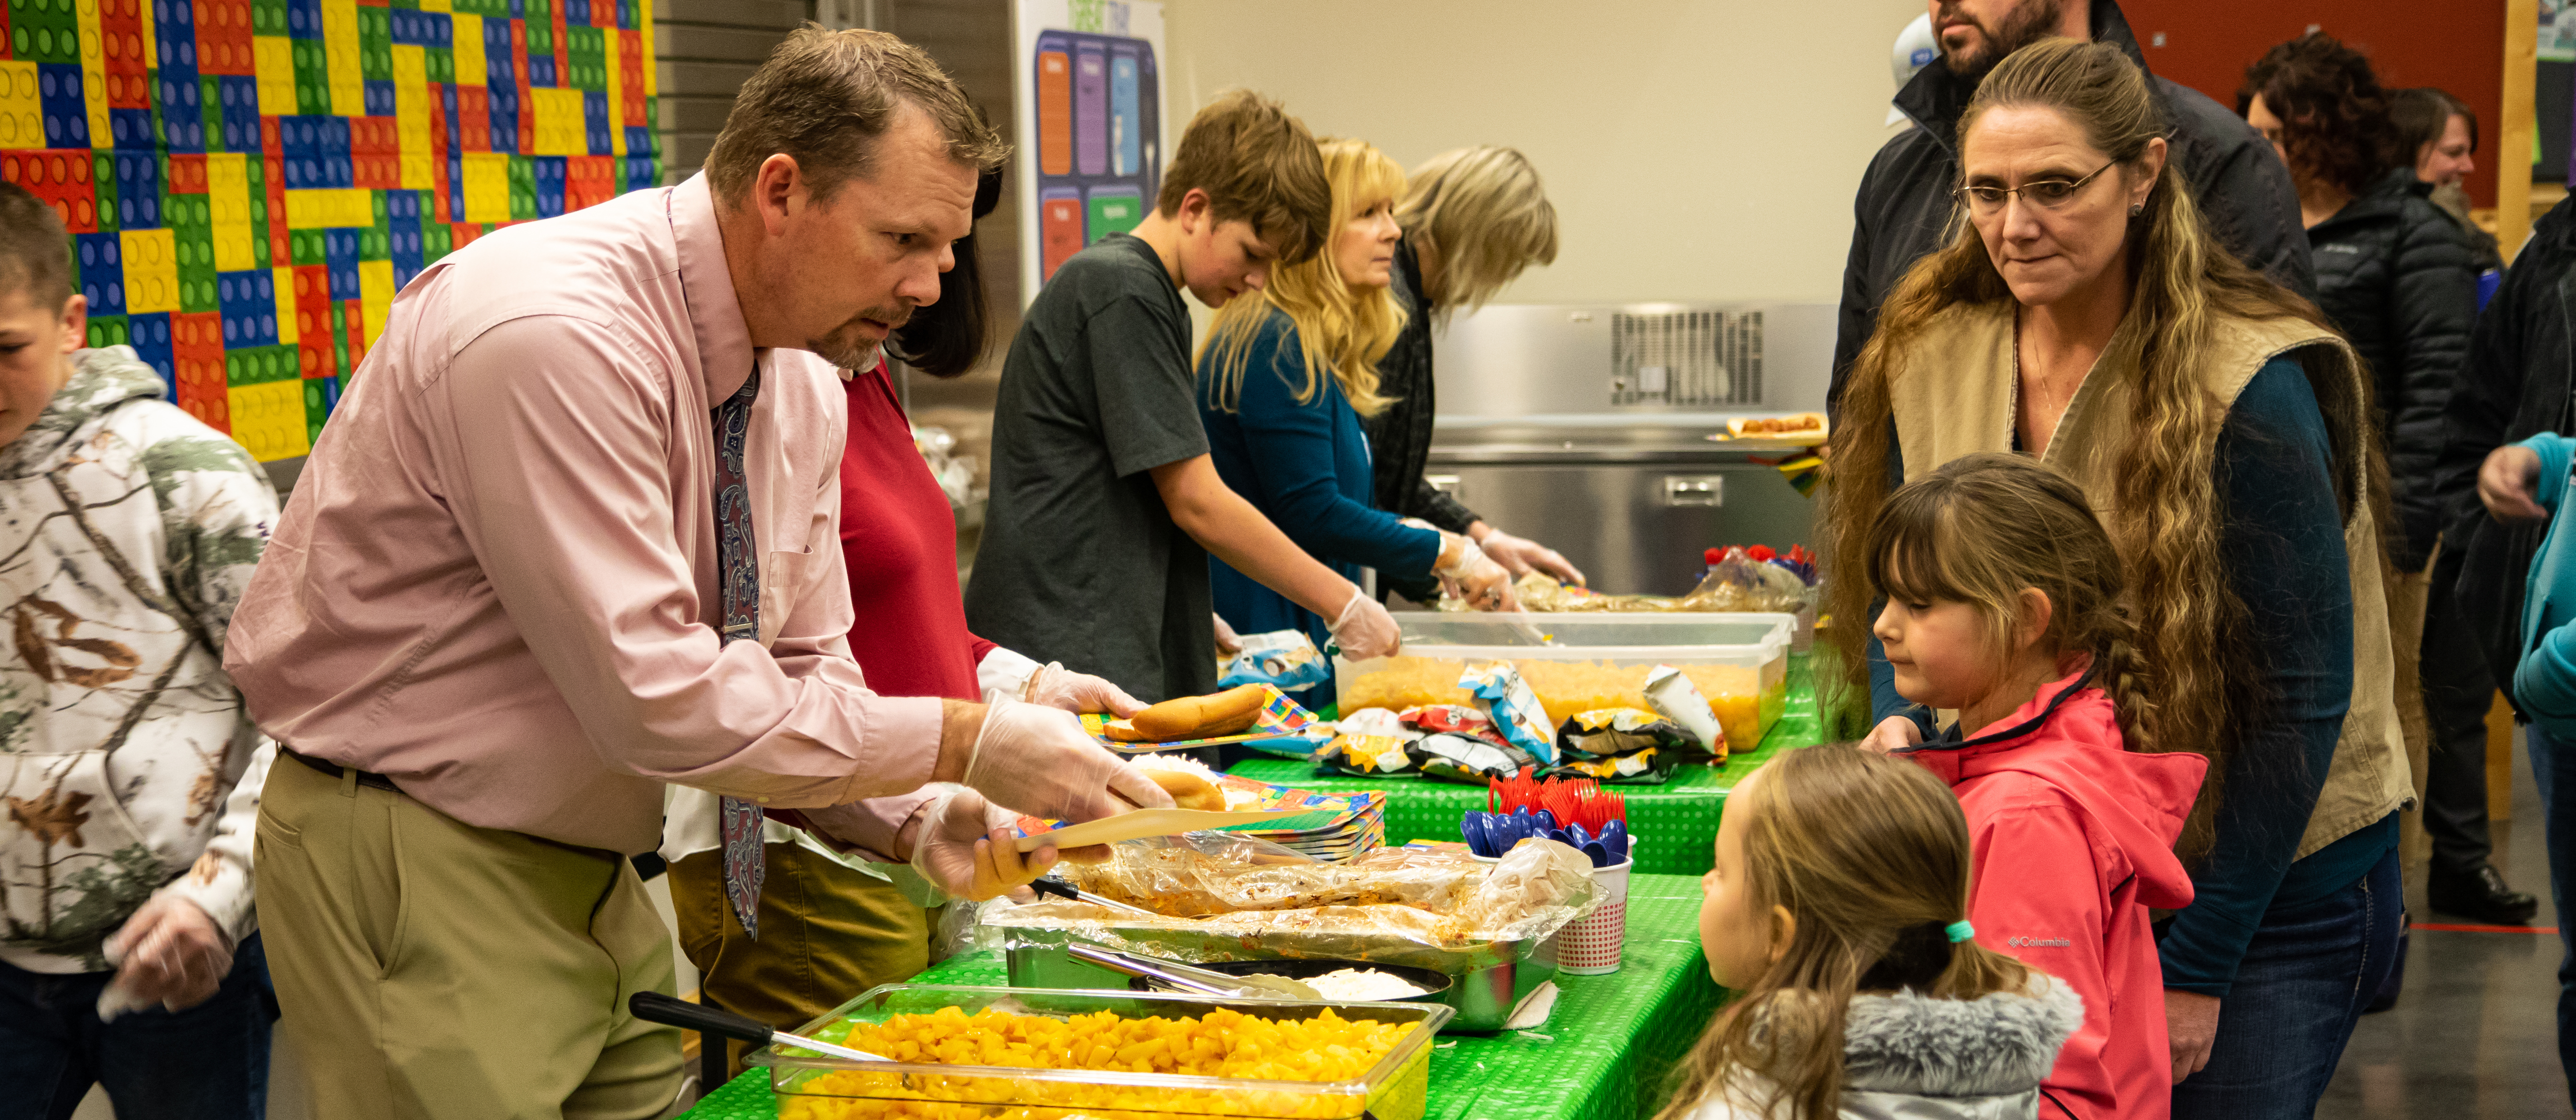 Serving Meals to students and families